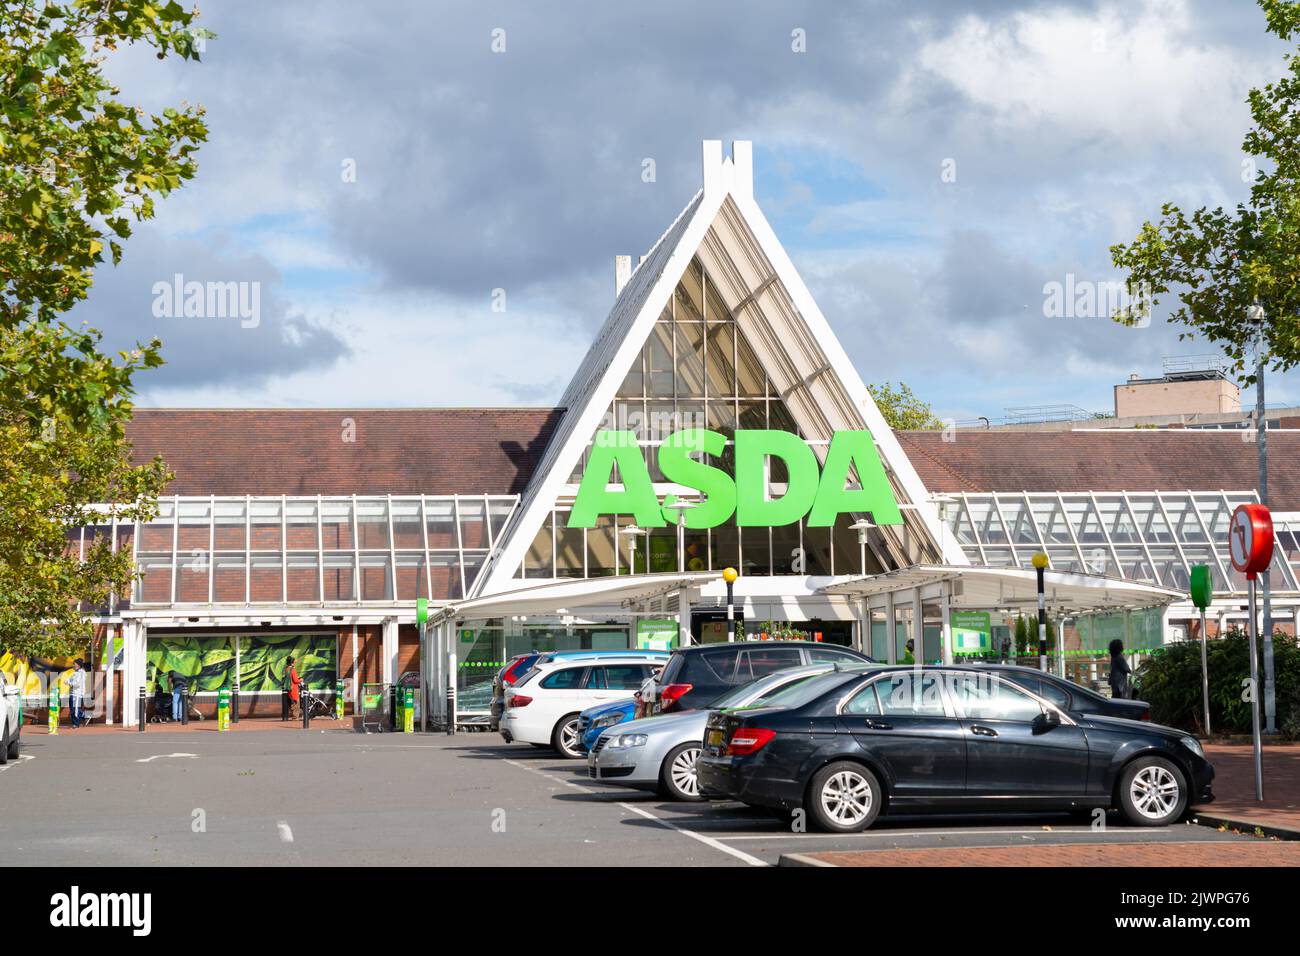 The front entrance of the Asda store in Wolverhampton City Centre, in the UK on an overcast day Stock Photo